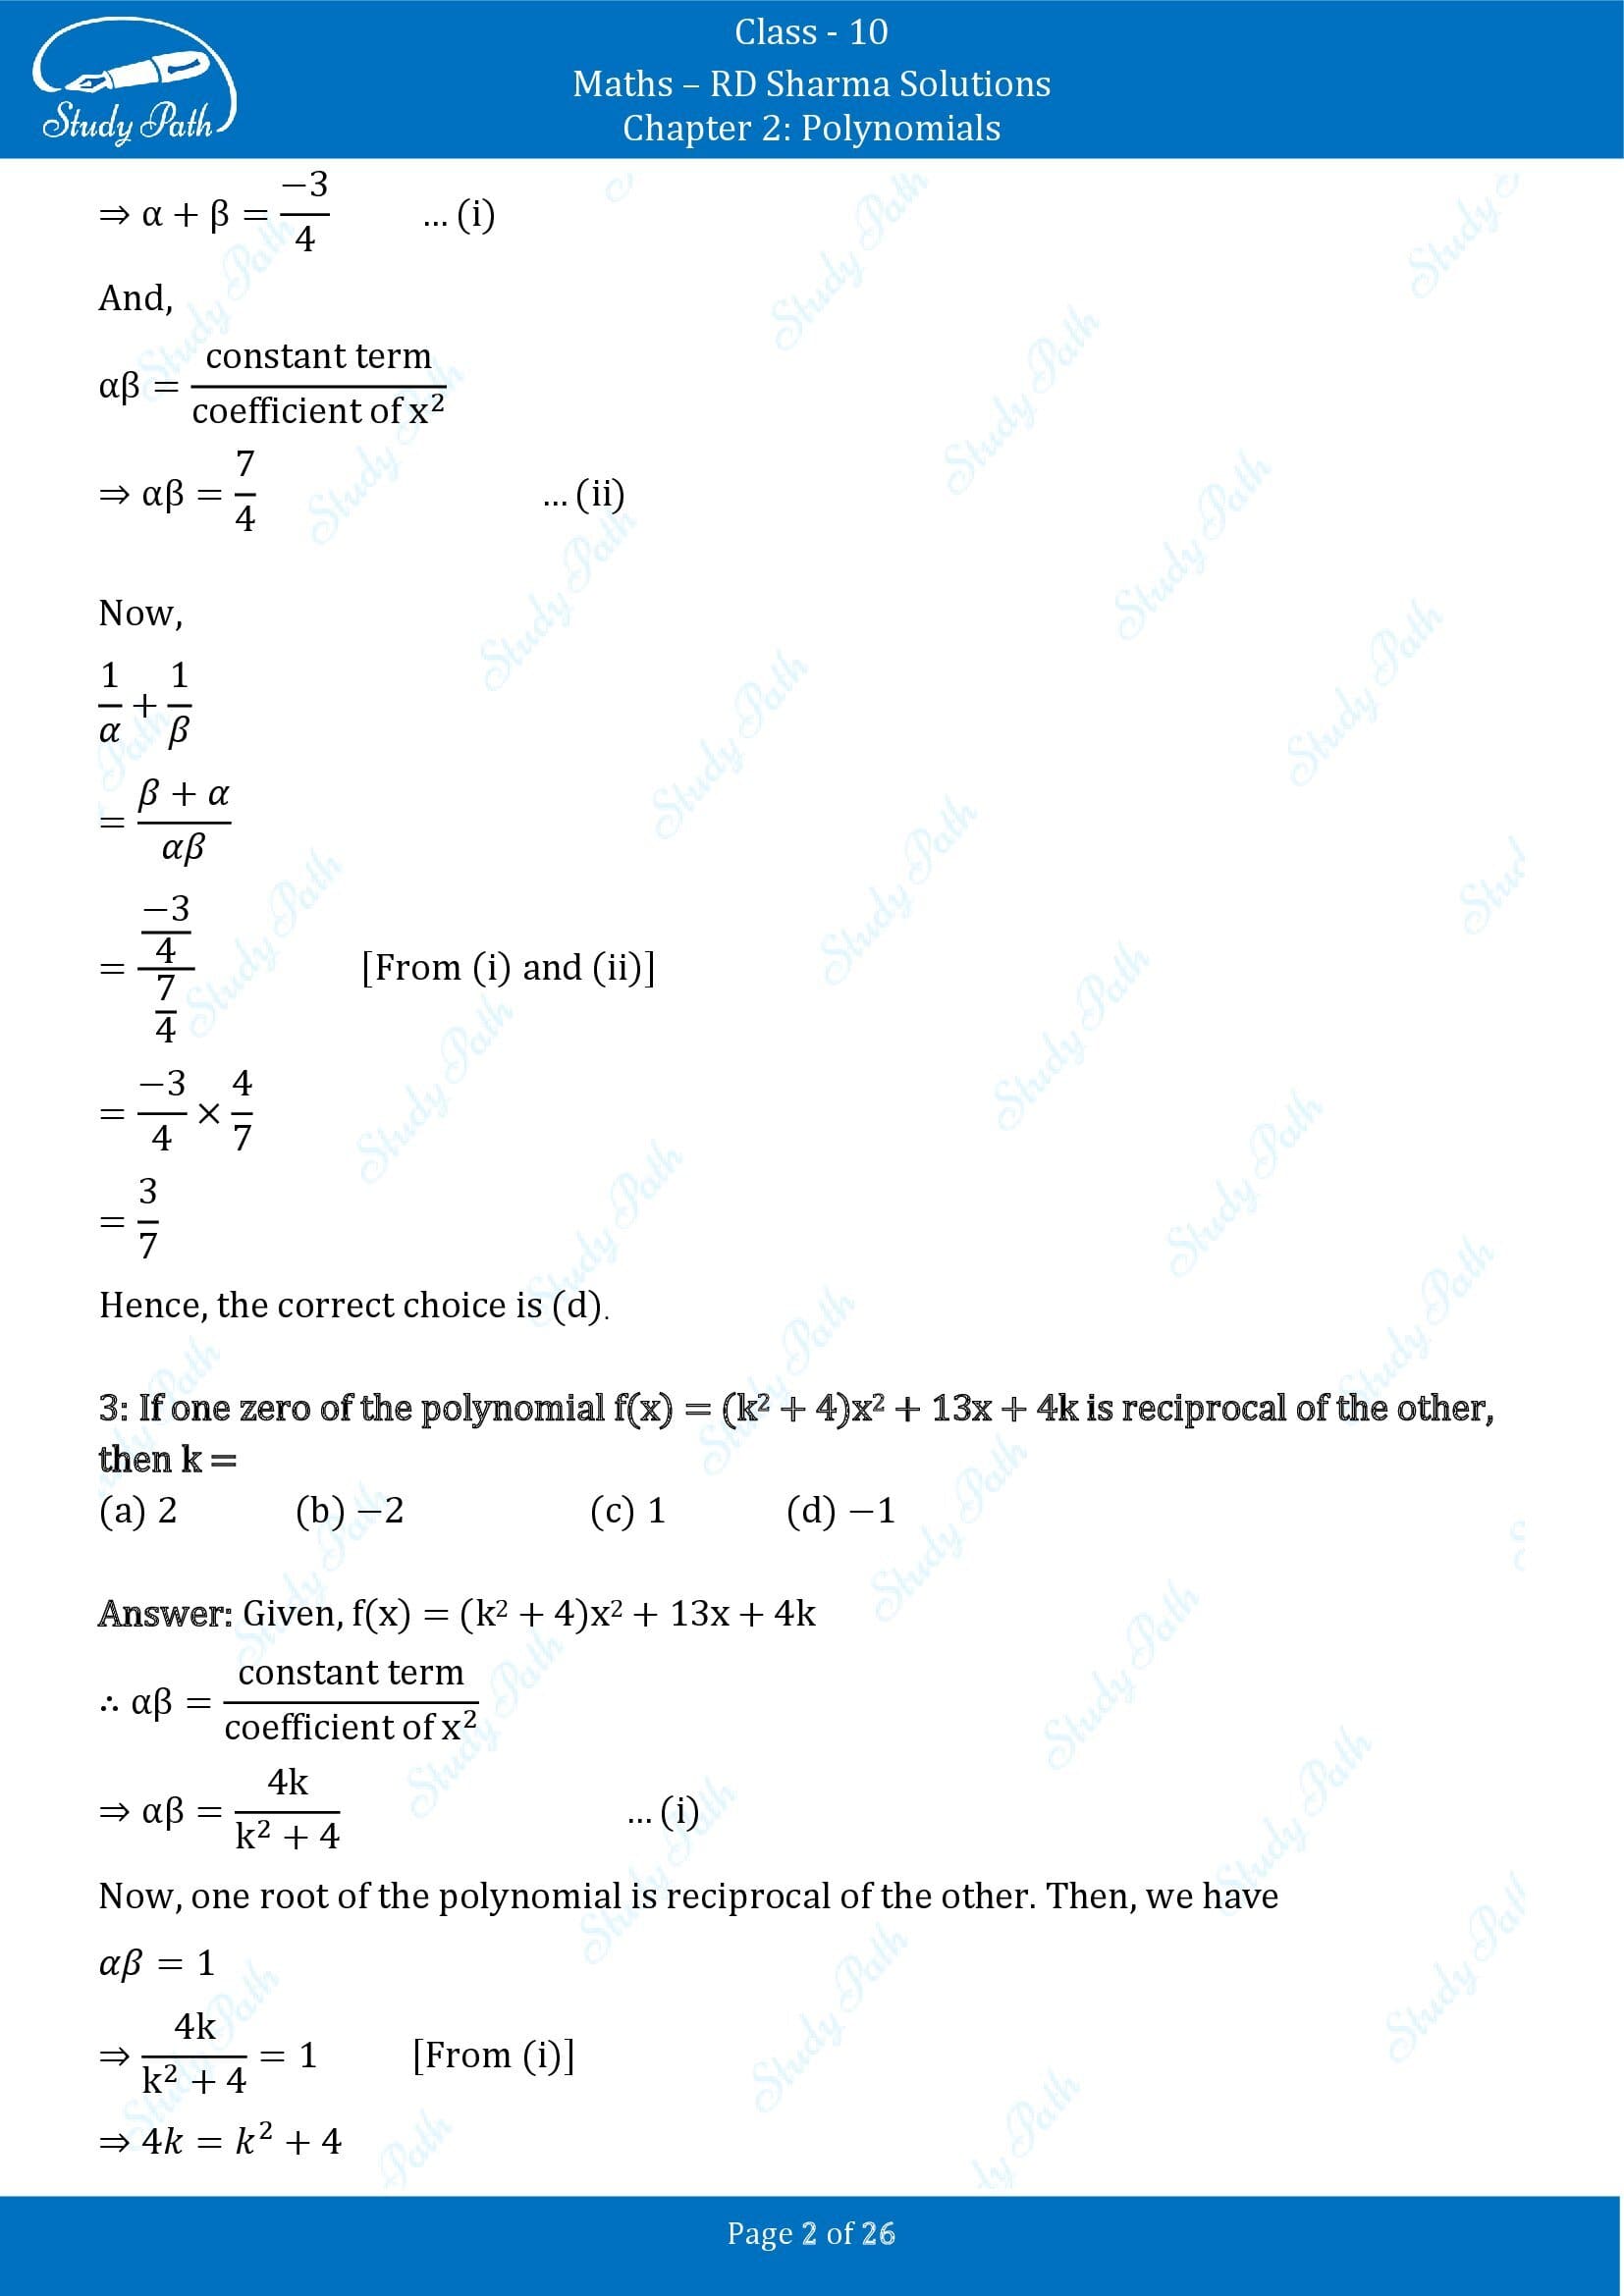 RD Sharma Solutions Class 10 Chapter 2 Polynomials Multiple Choice Questions MCQs 00002